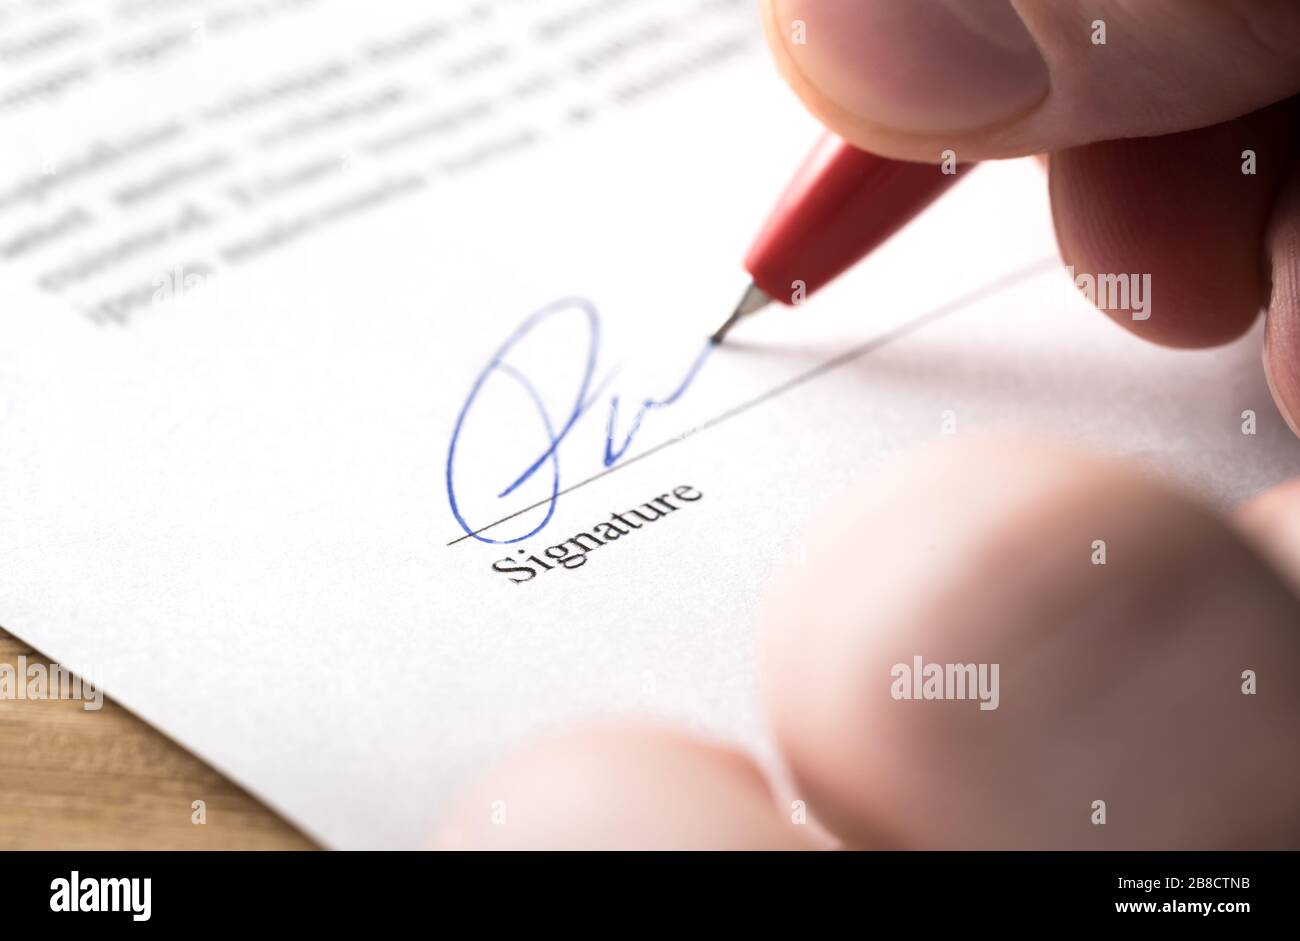 Signing contract, lease or settlement for acquisition, apartment lease, insurance, bank loan, mortgage or business buyout. Man writing name. Stock Photo